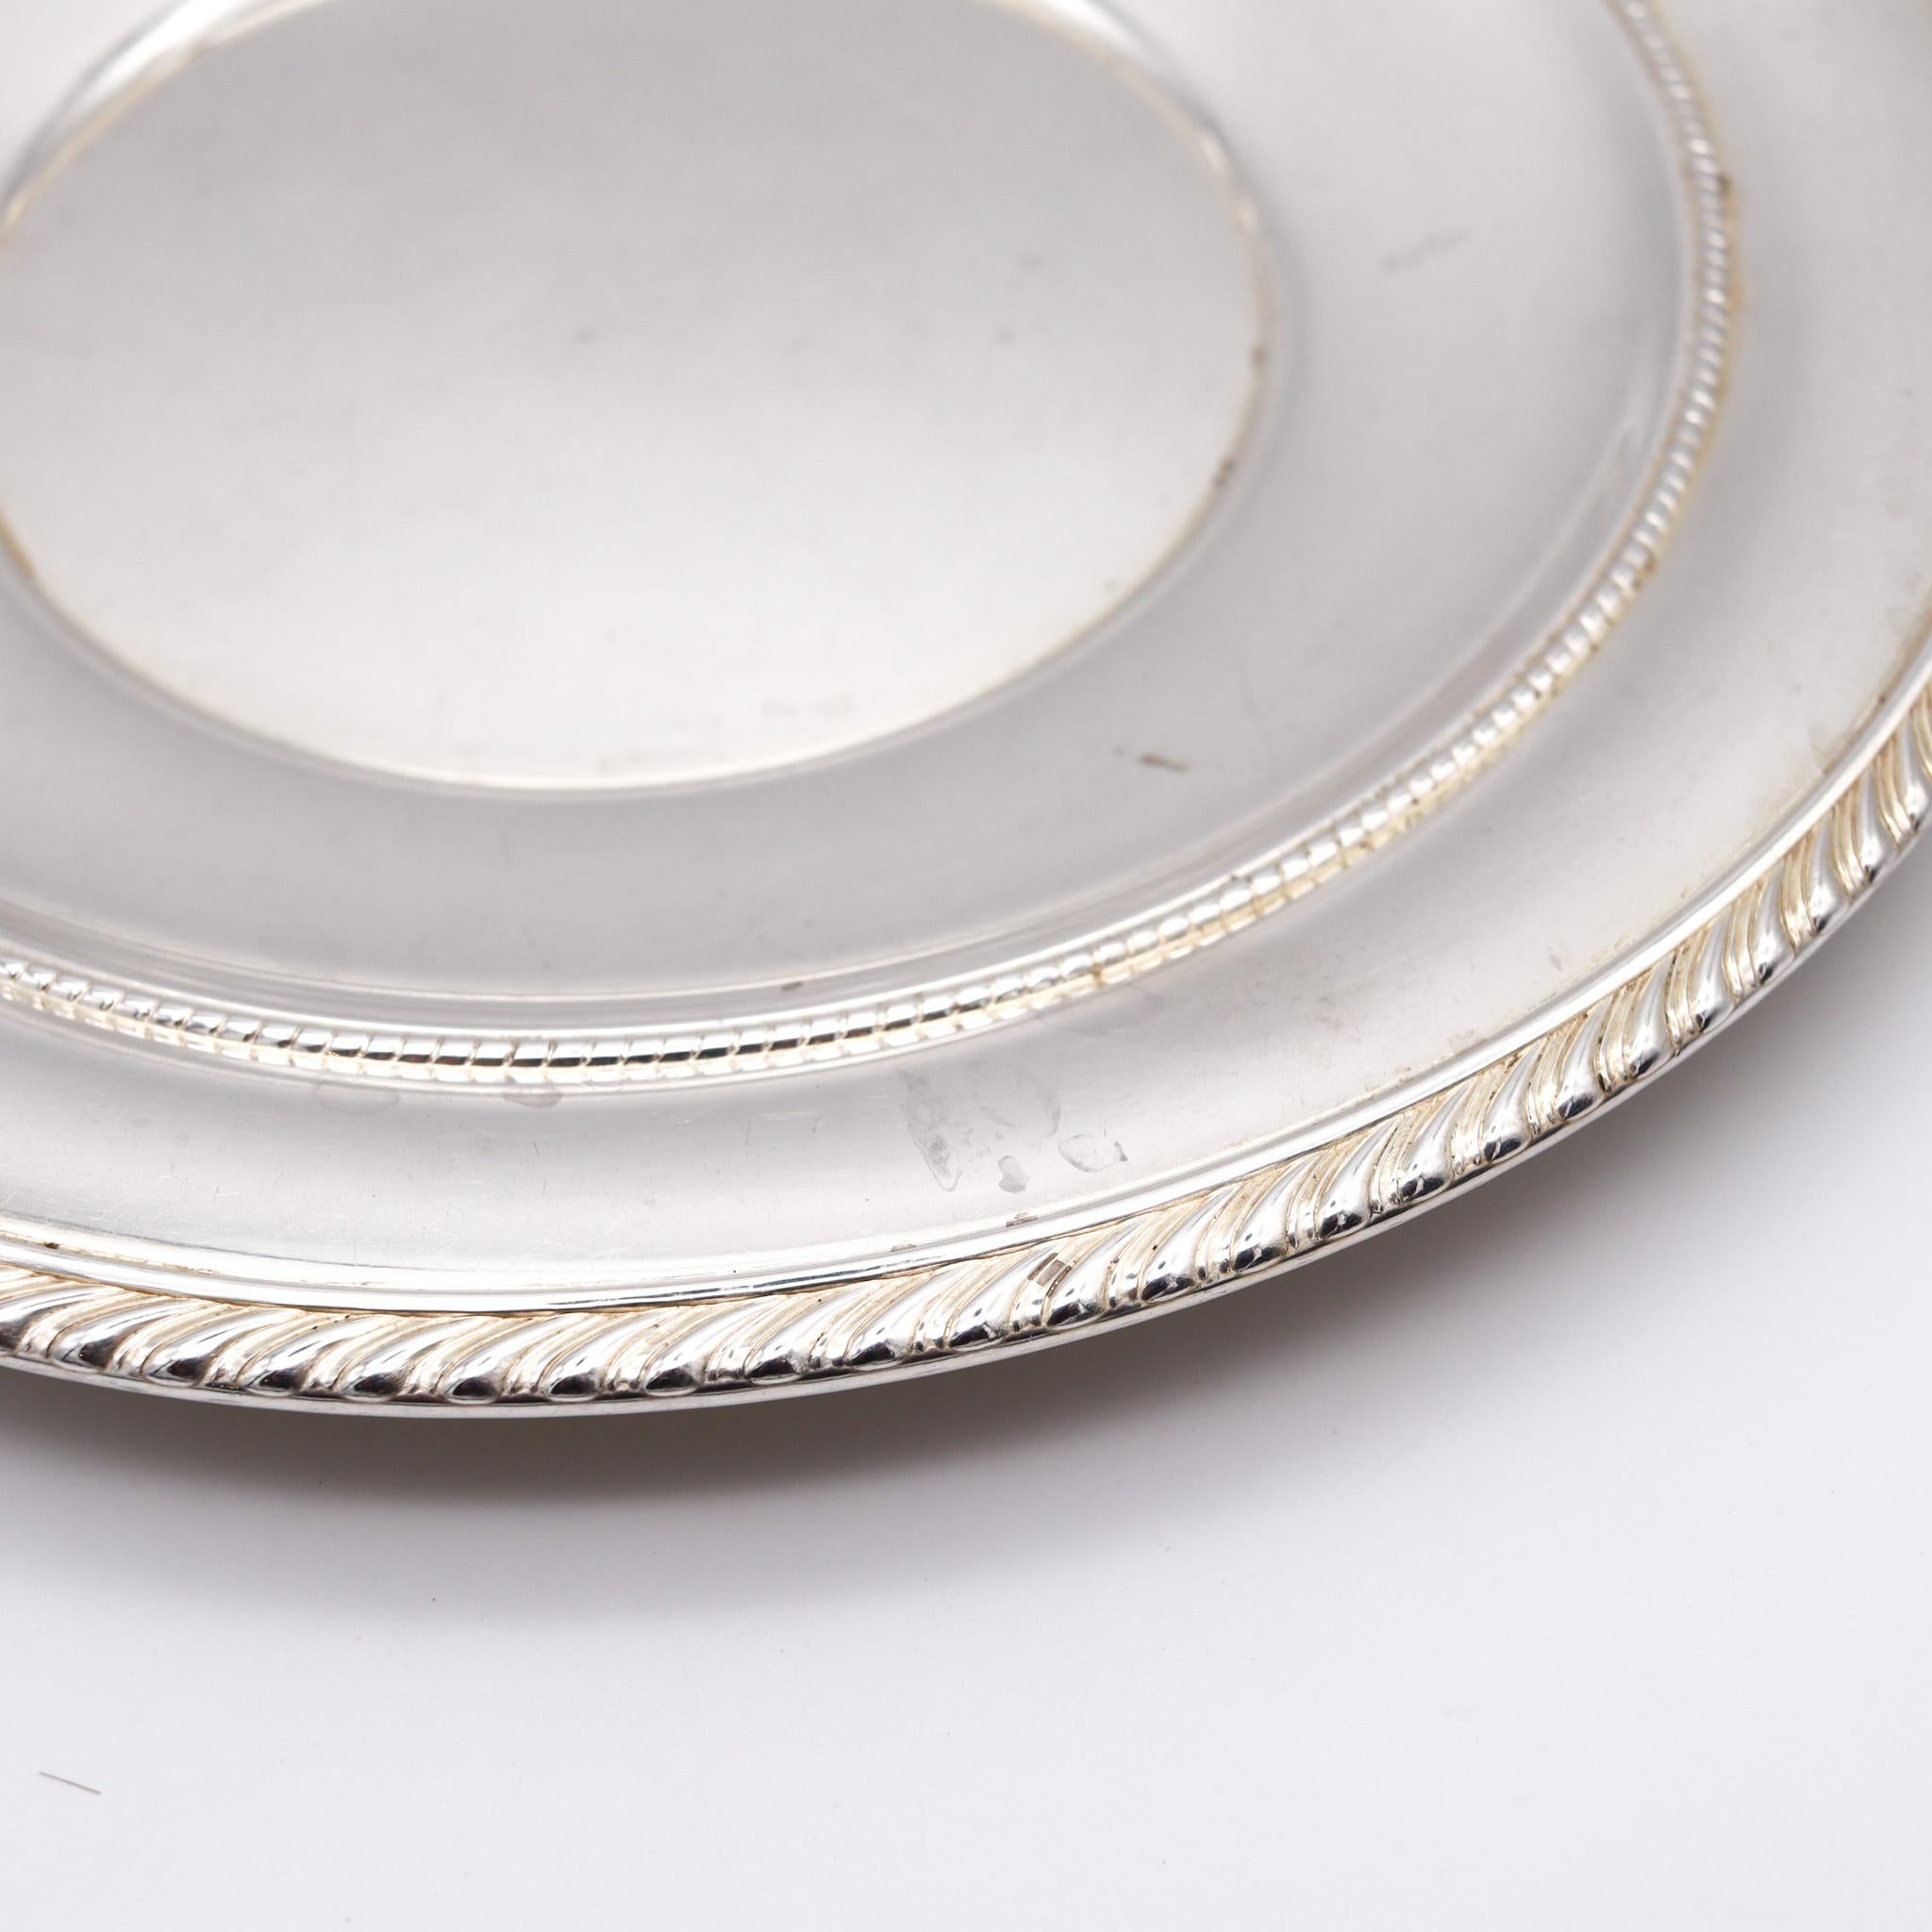 Mid-Century Modern Gorham American 1960 Gadroon Round Tray Pattern 345 in .925 Sterling Silver For Sale